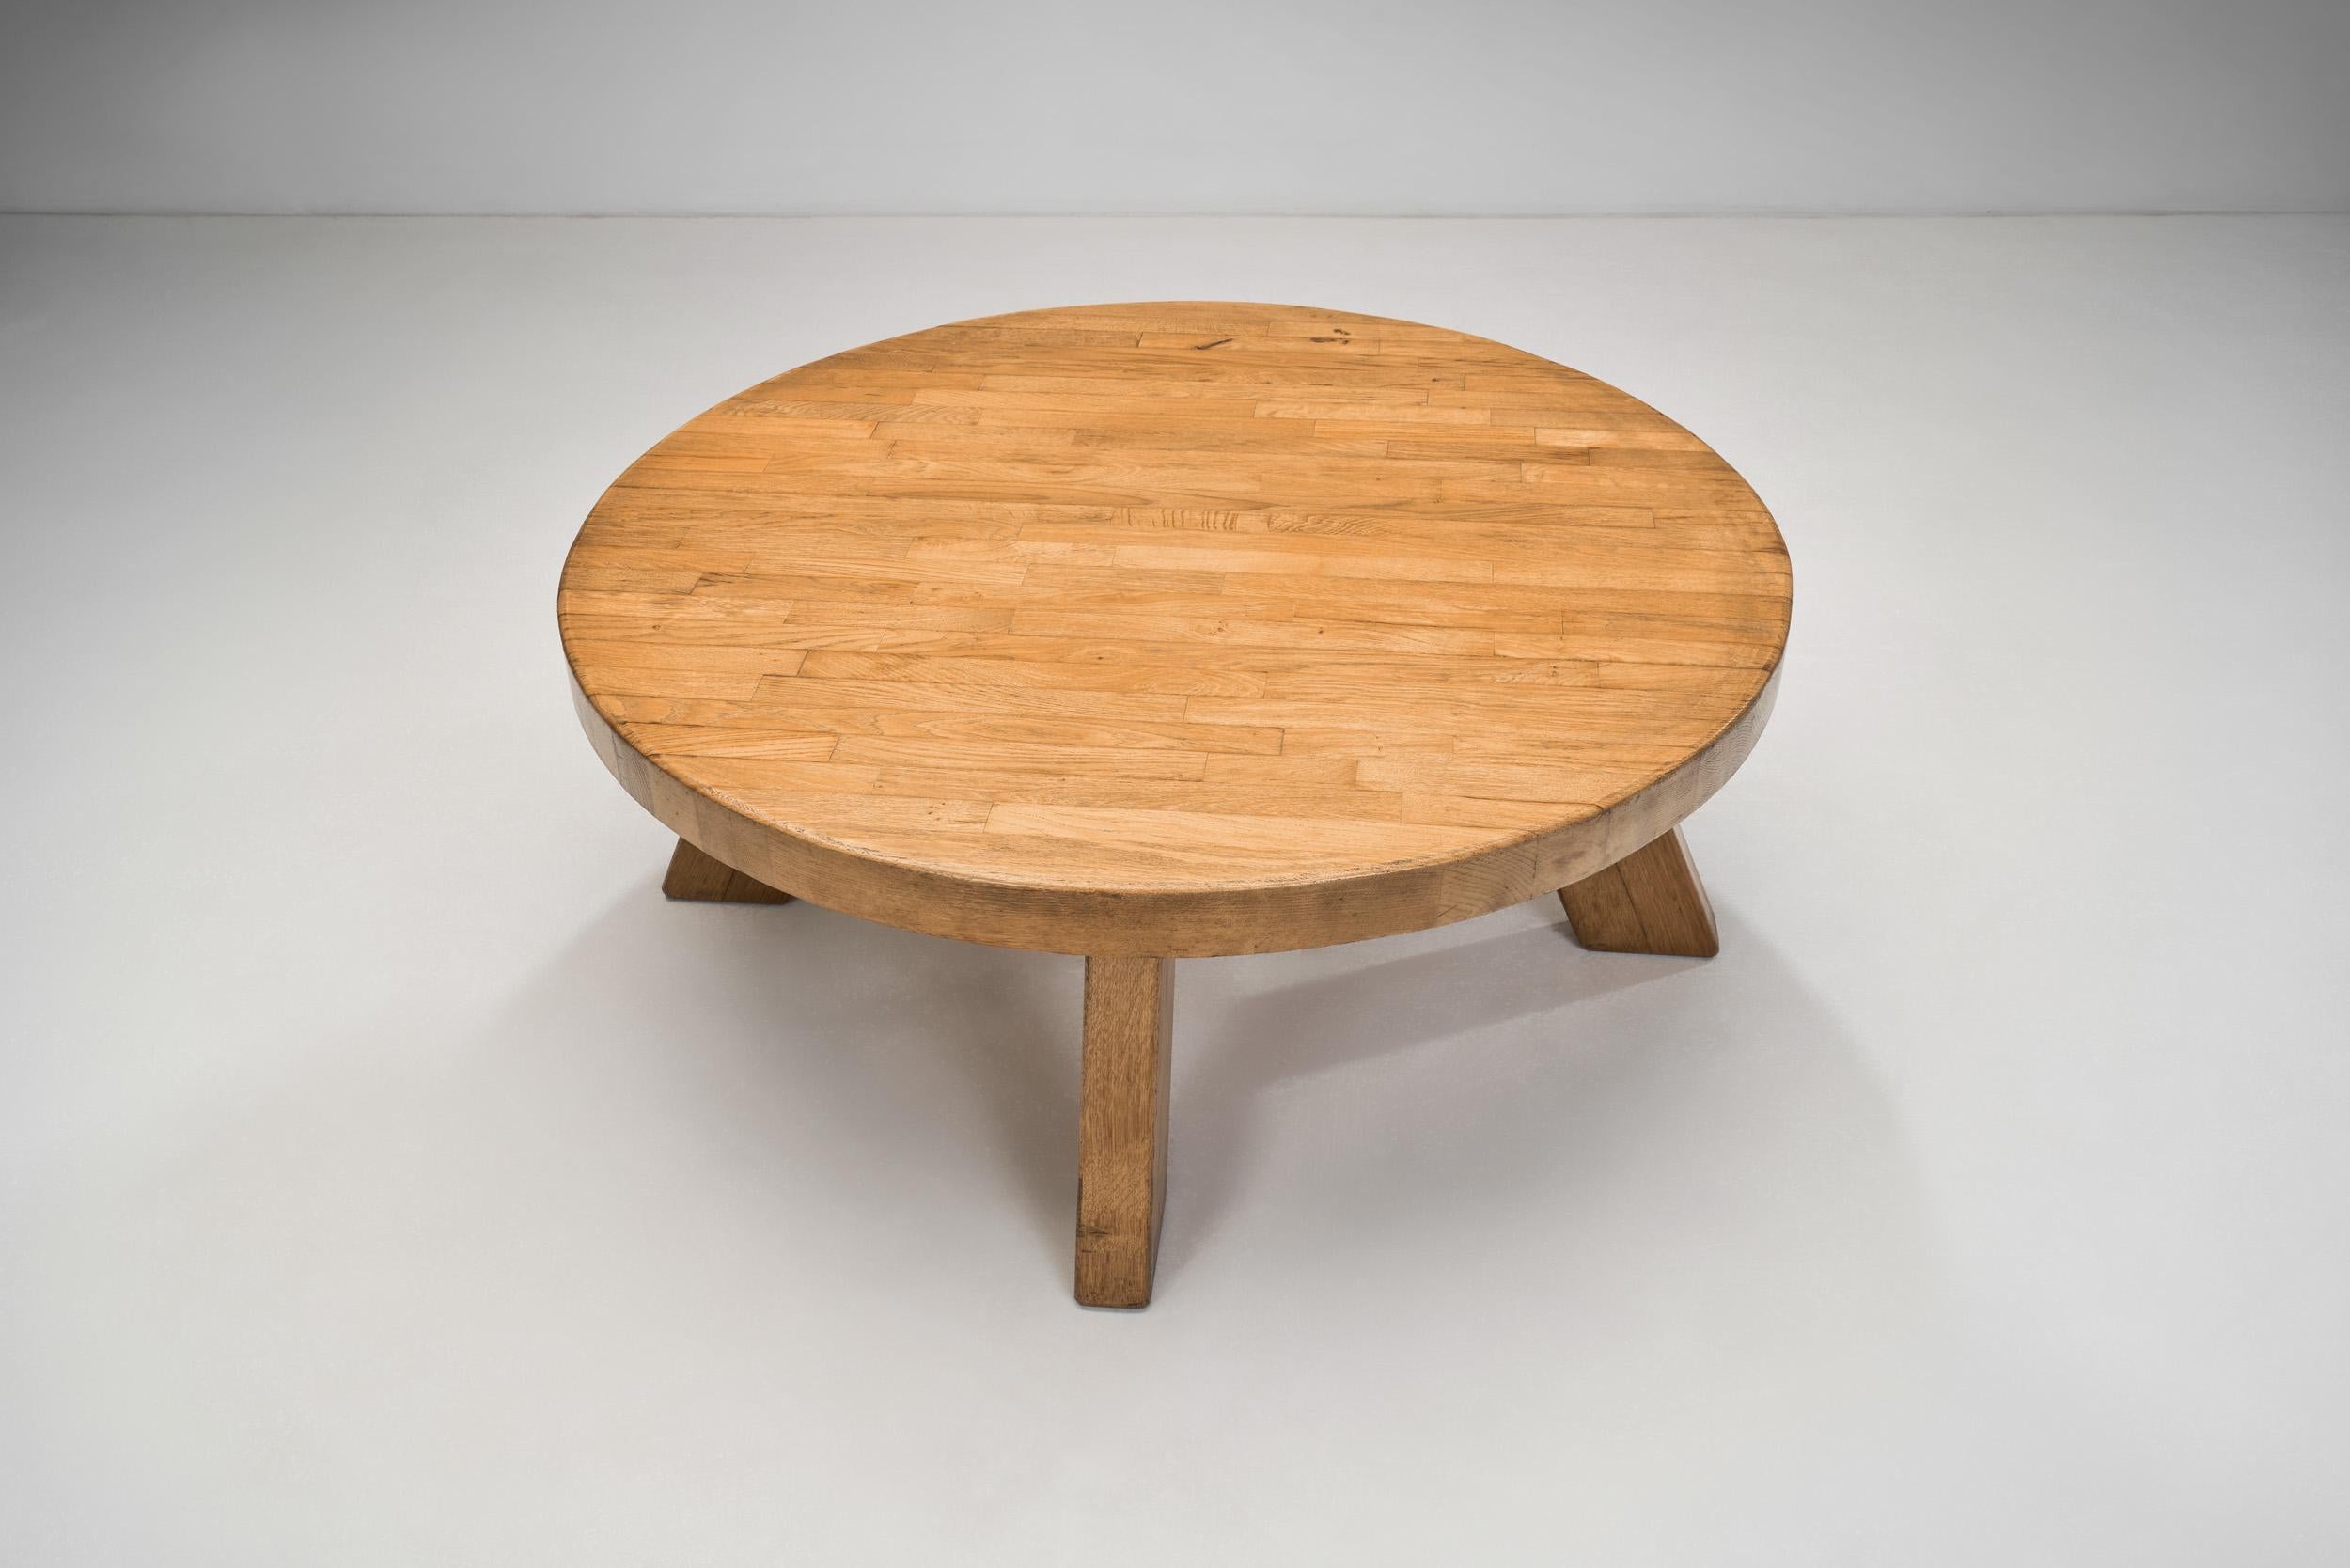 Solid Oak Round Brutalist Coffee Table, The Netherlands 1970s For Sale 1